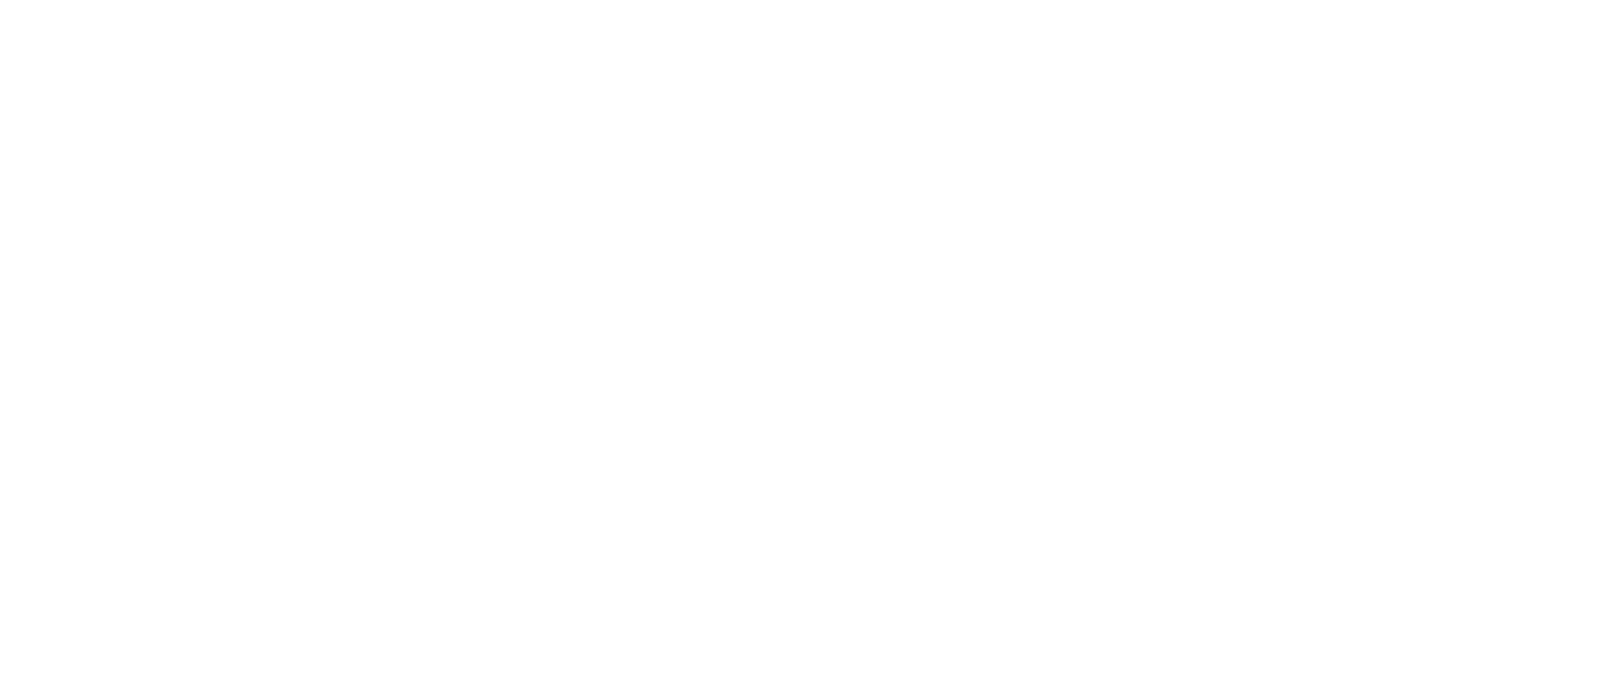 Qreat